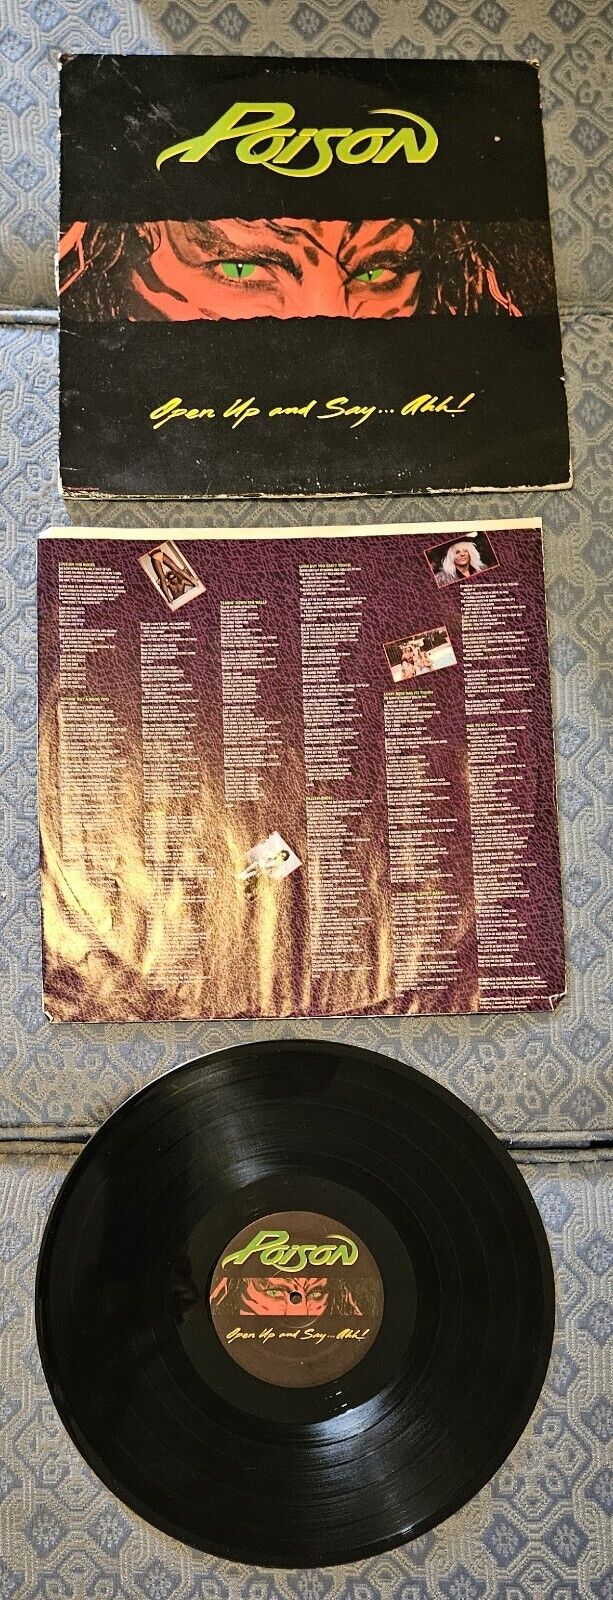 Vintage 1988 Poison Open Up and Say...Ahh - 12” Vinyl LP Record Tested VG/Vg